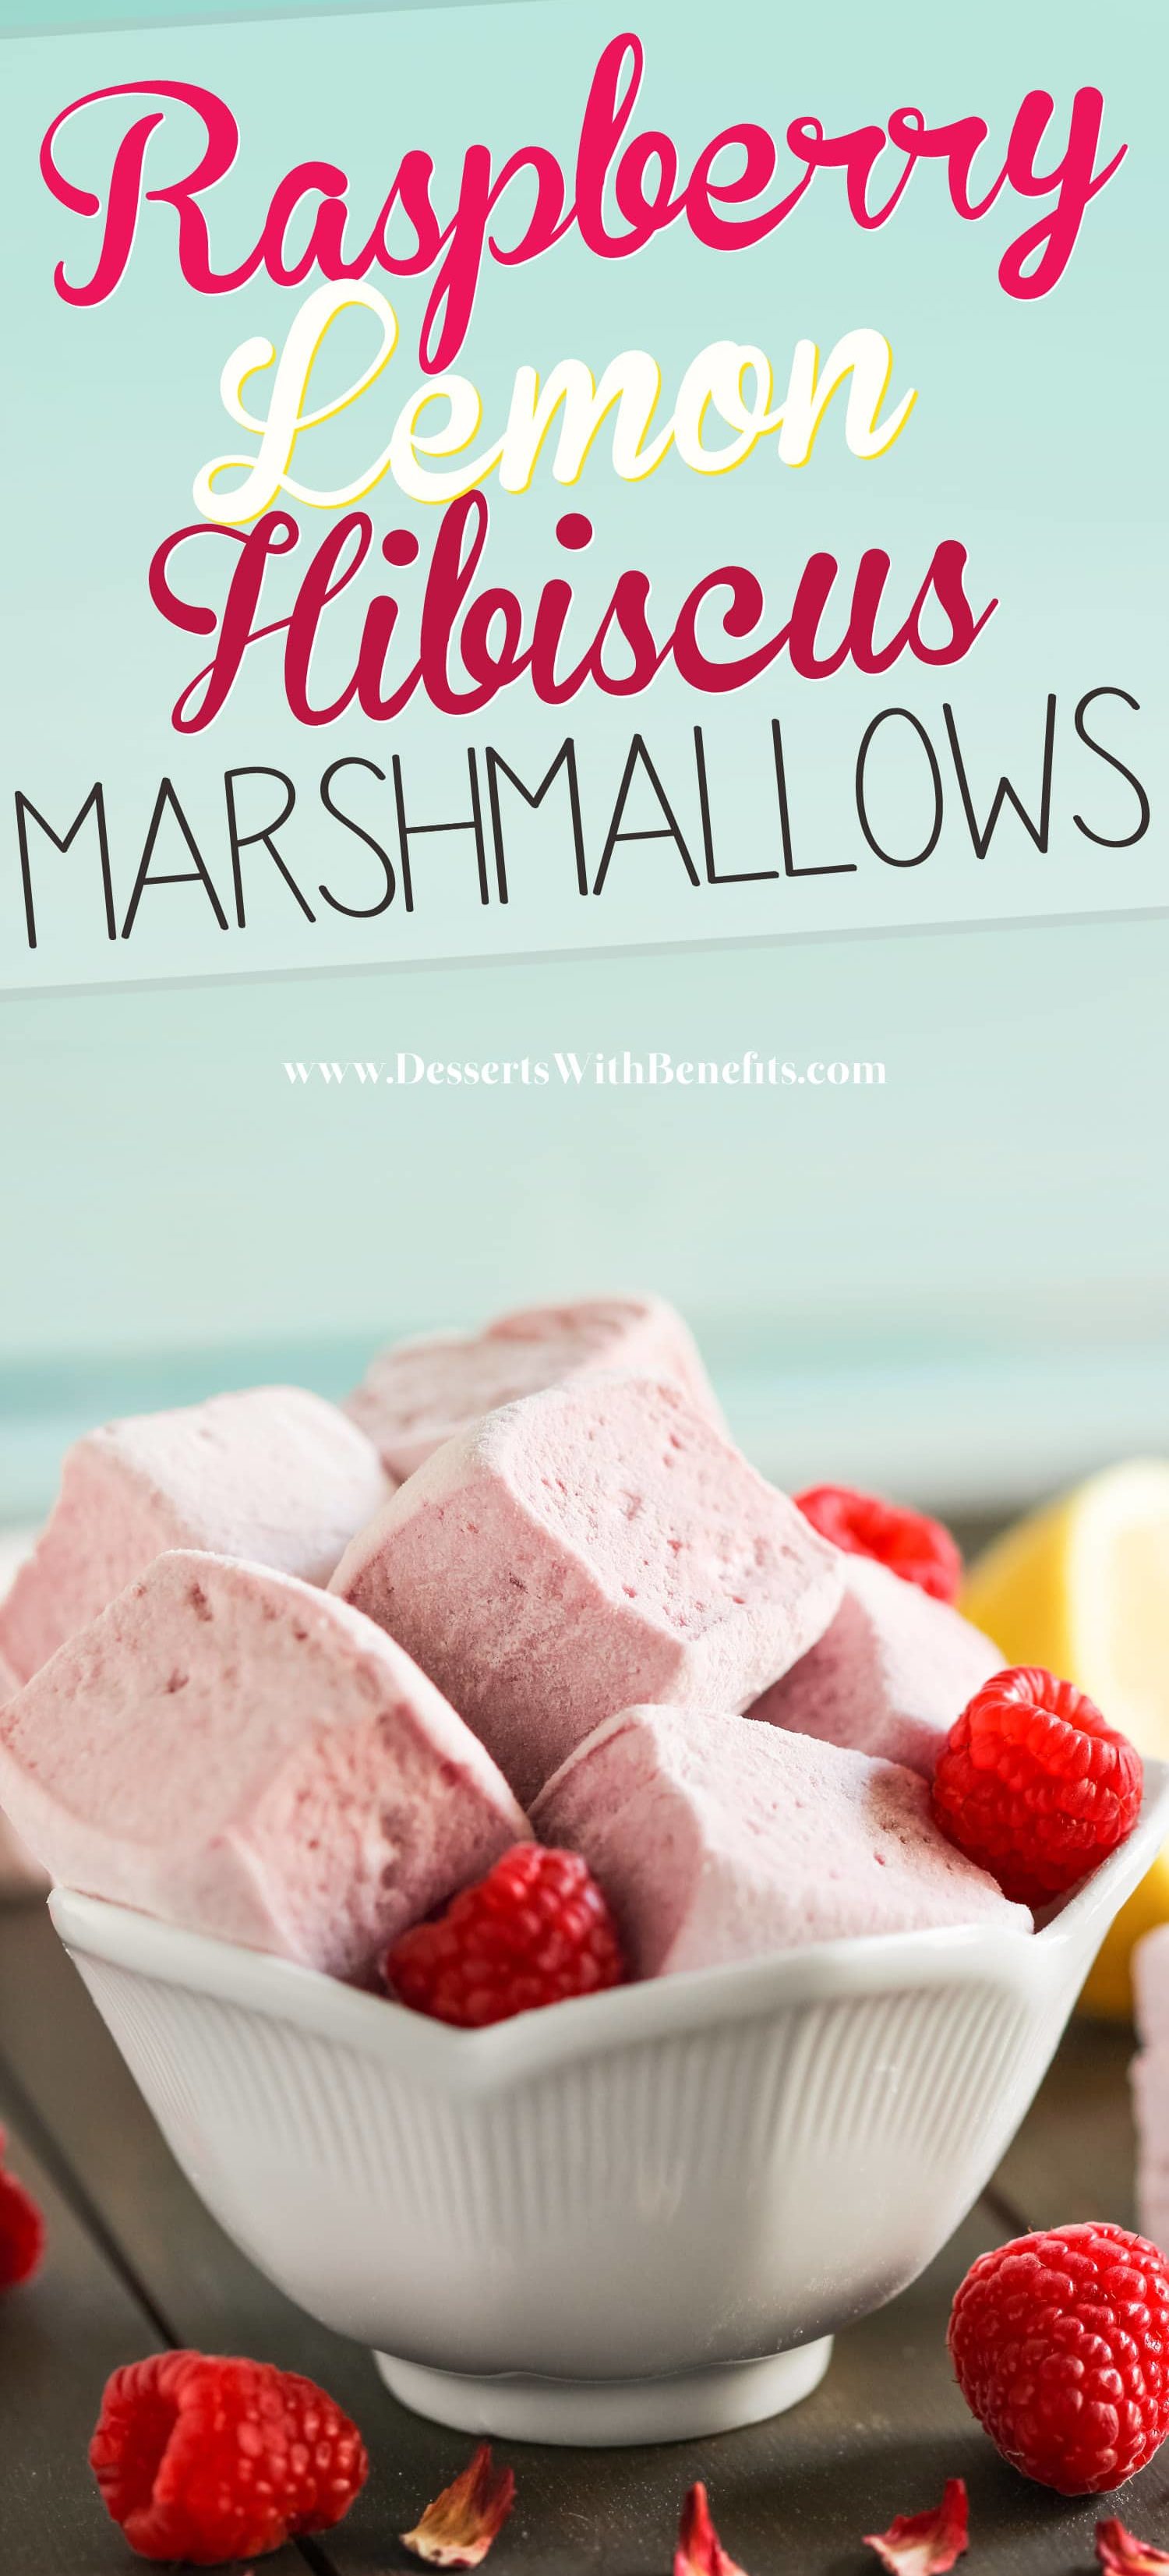 This recipe for Healthy Raspberry Lemon Hibiscus Marshmallows yields the lightest, fluffiest, and most flavorful mallows you could ever dream of! Sweet from the raspberries, tart from the lemon, unique from the hibiscus. Naturally sweetened (no corn syrup here!) and naturally pink from the hibiscus (no artificial food dyes whatsoever!) -- Healthy Dessert Recipes at the Desserts With Benefits Blog (www.DessertsWithBenefits.com)